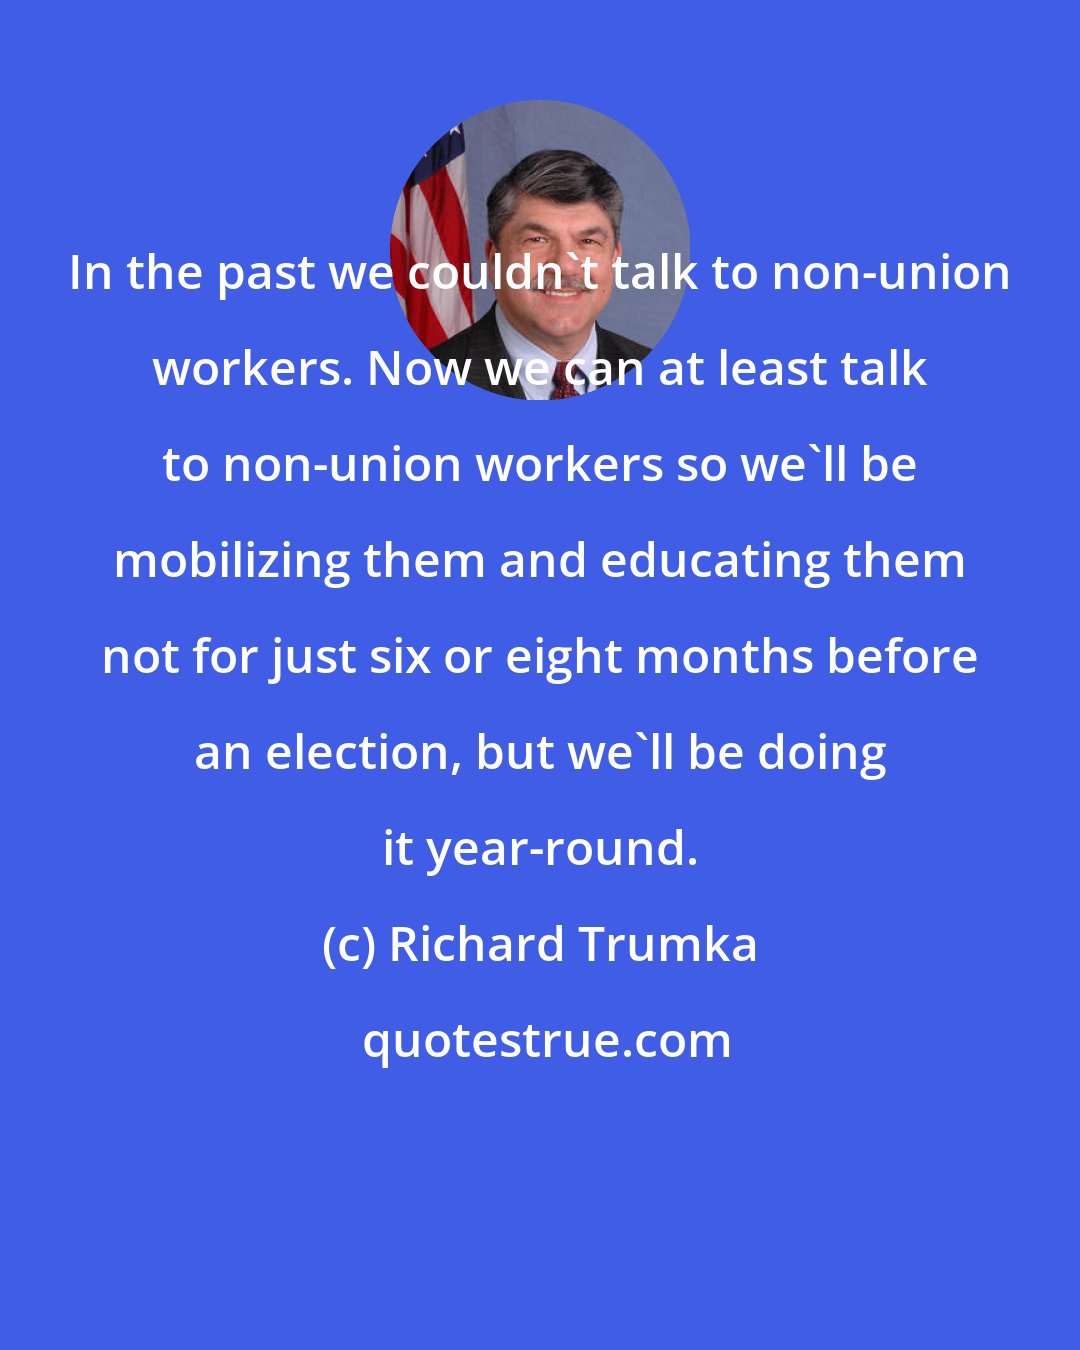 Richard Trumka: In the past we couldn't talk to non-union workers. Now we can at least talk to non-union workers so we'll be mobilizing them and educating them not for just six or eight months before an election, but we'll be doing it year-round.